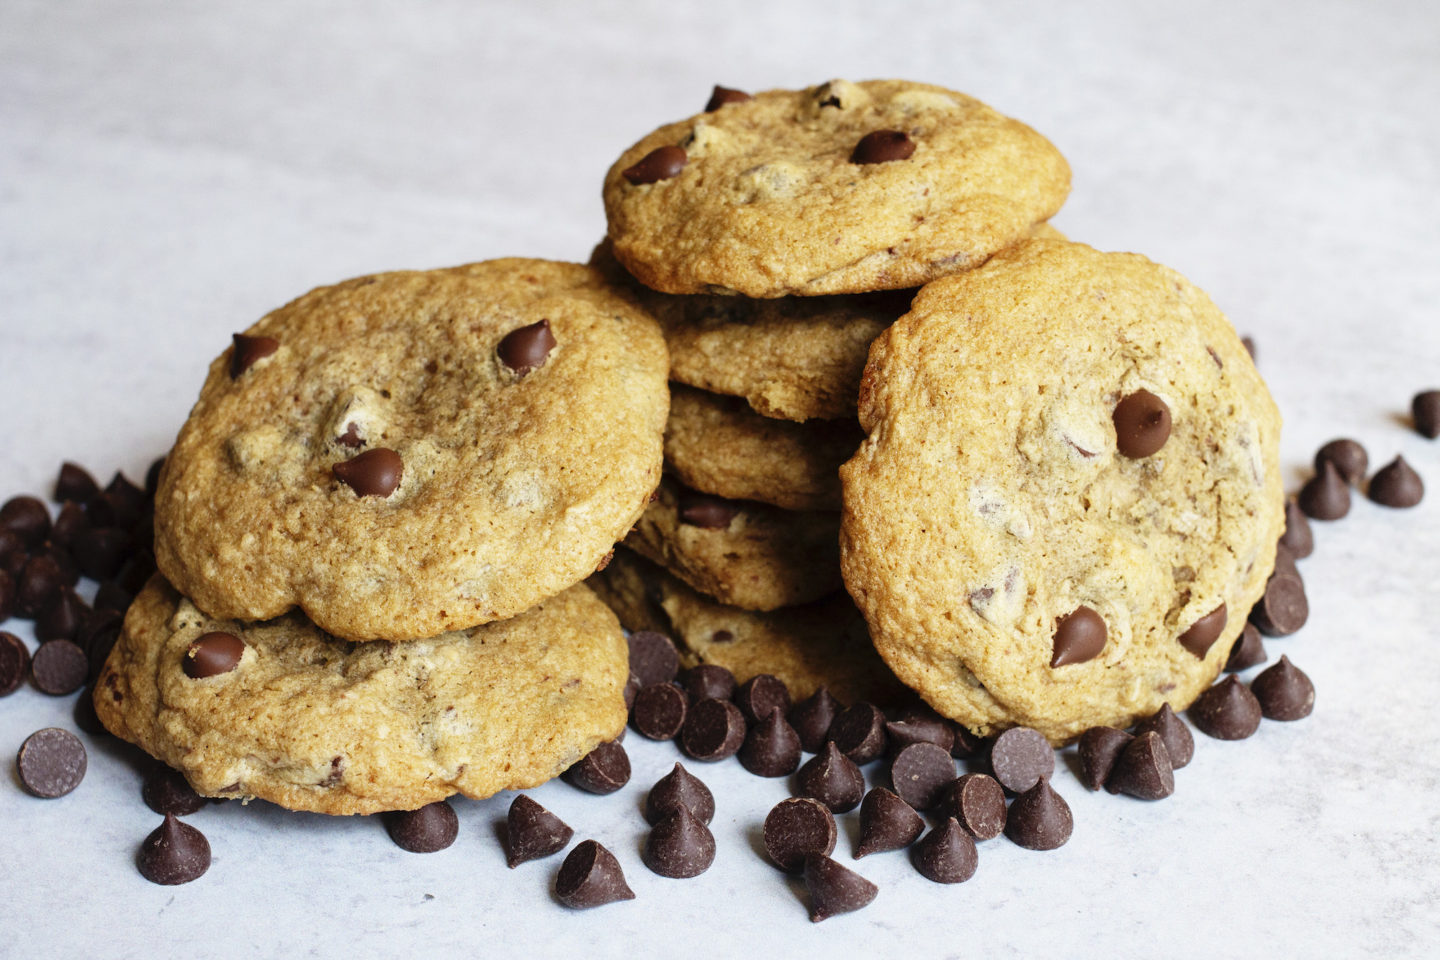 Stacks of gluten-free chocolate chip cookies with chocolate chips scattered around